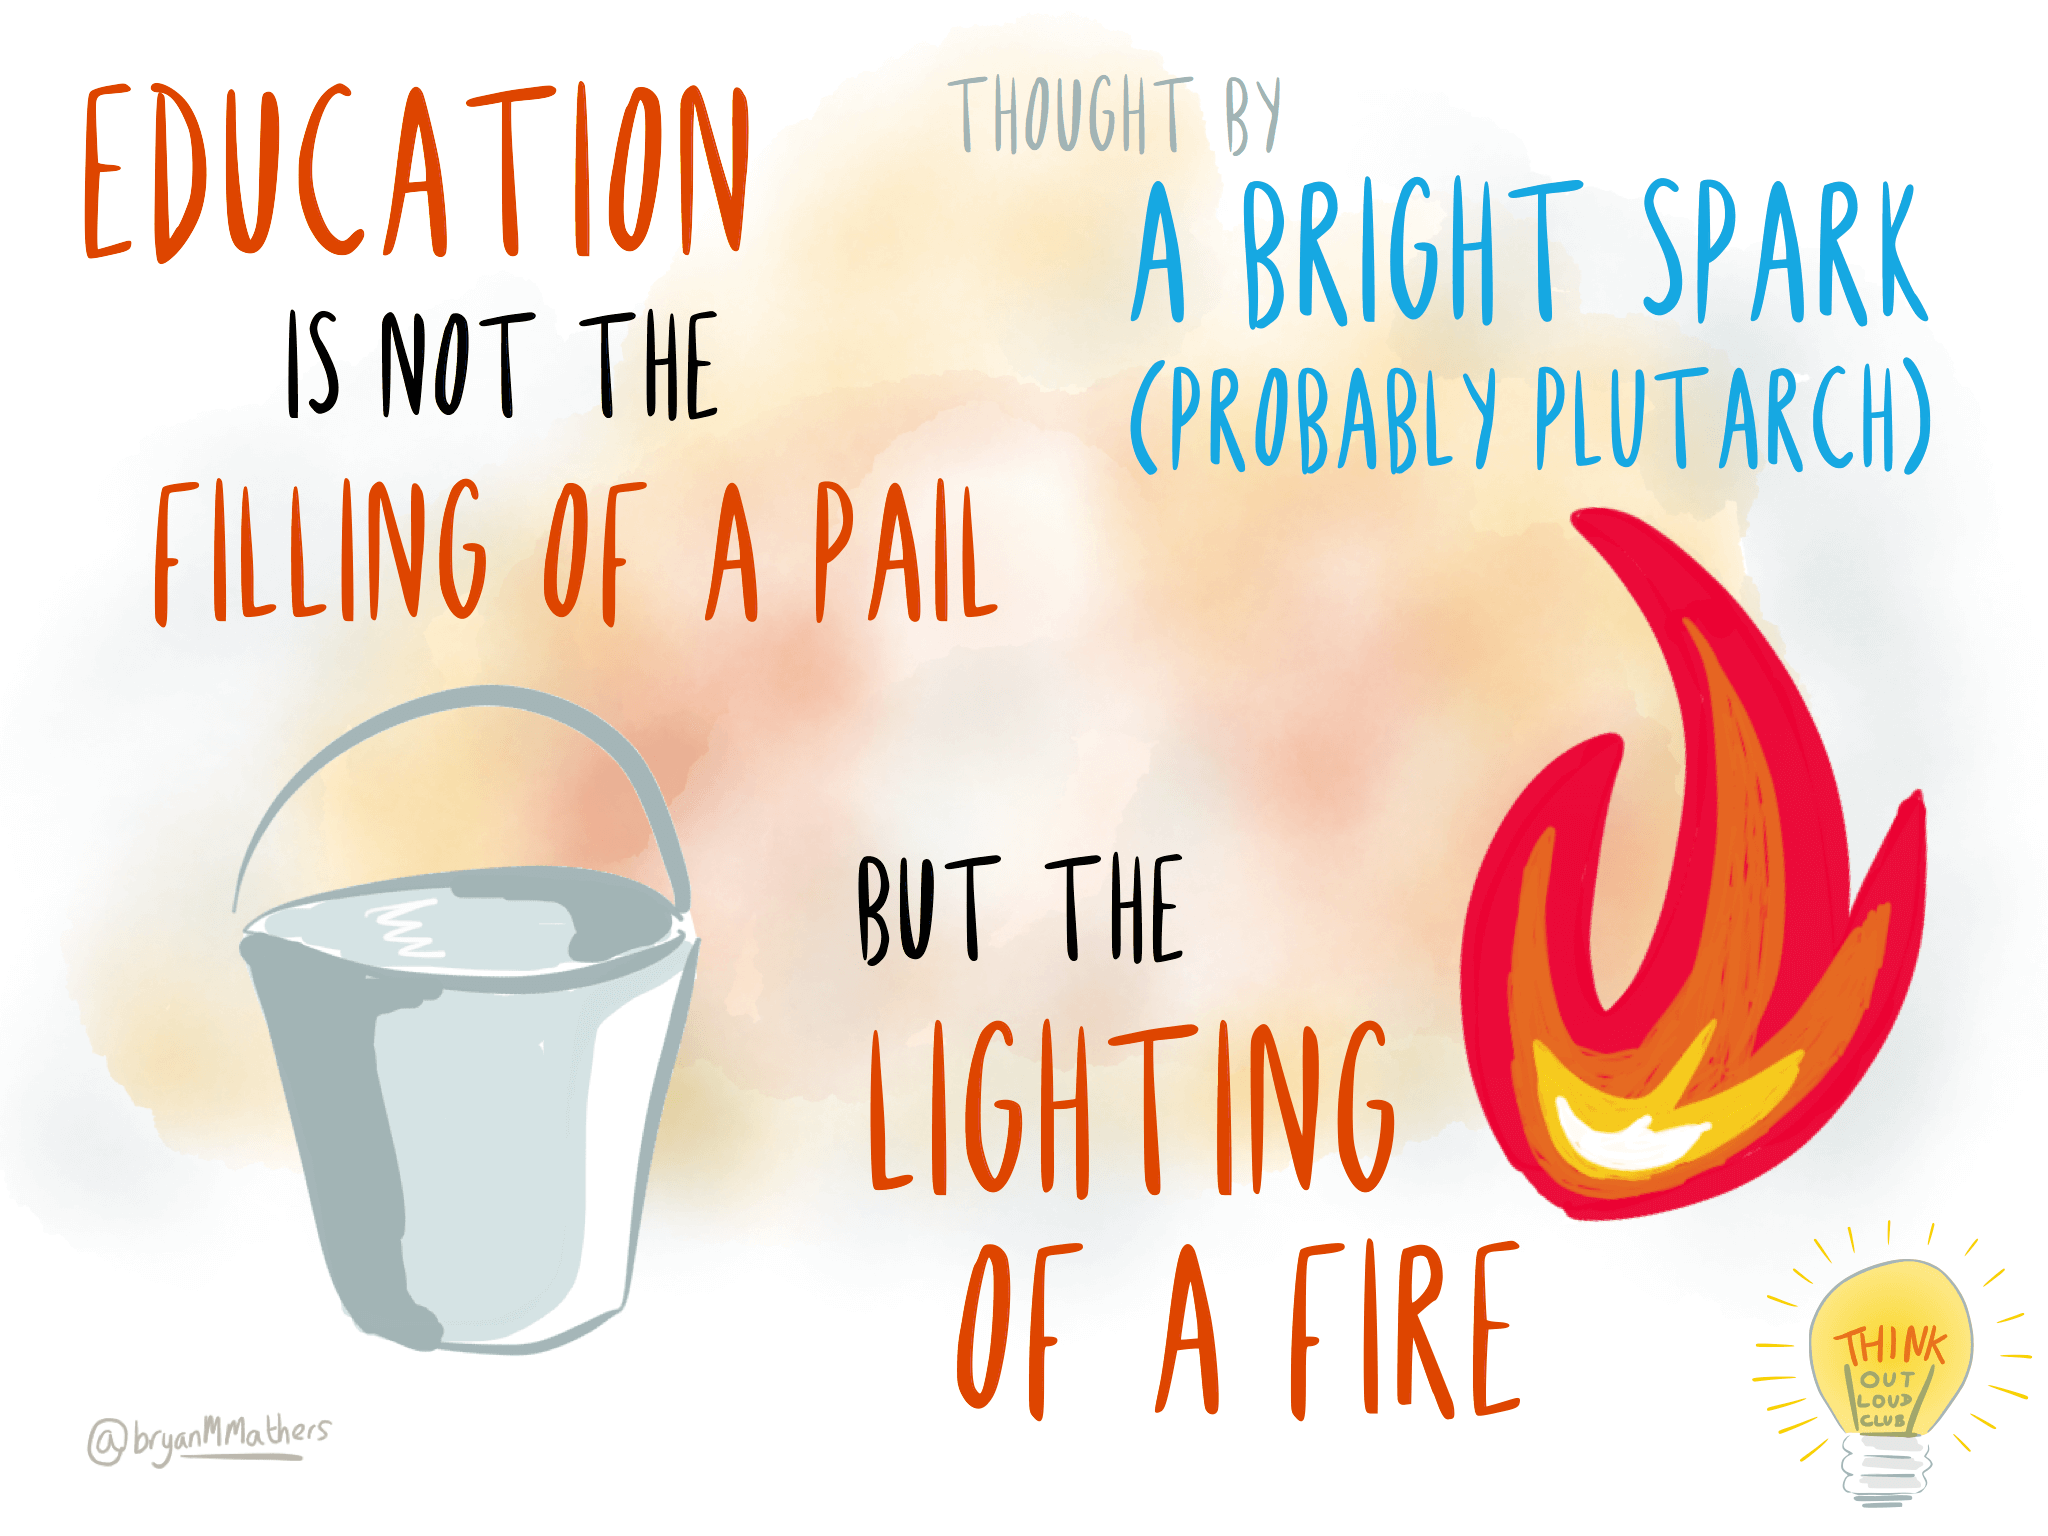 Education – a thought by a bright spark